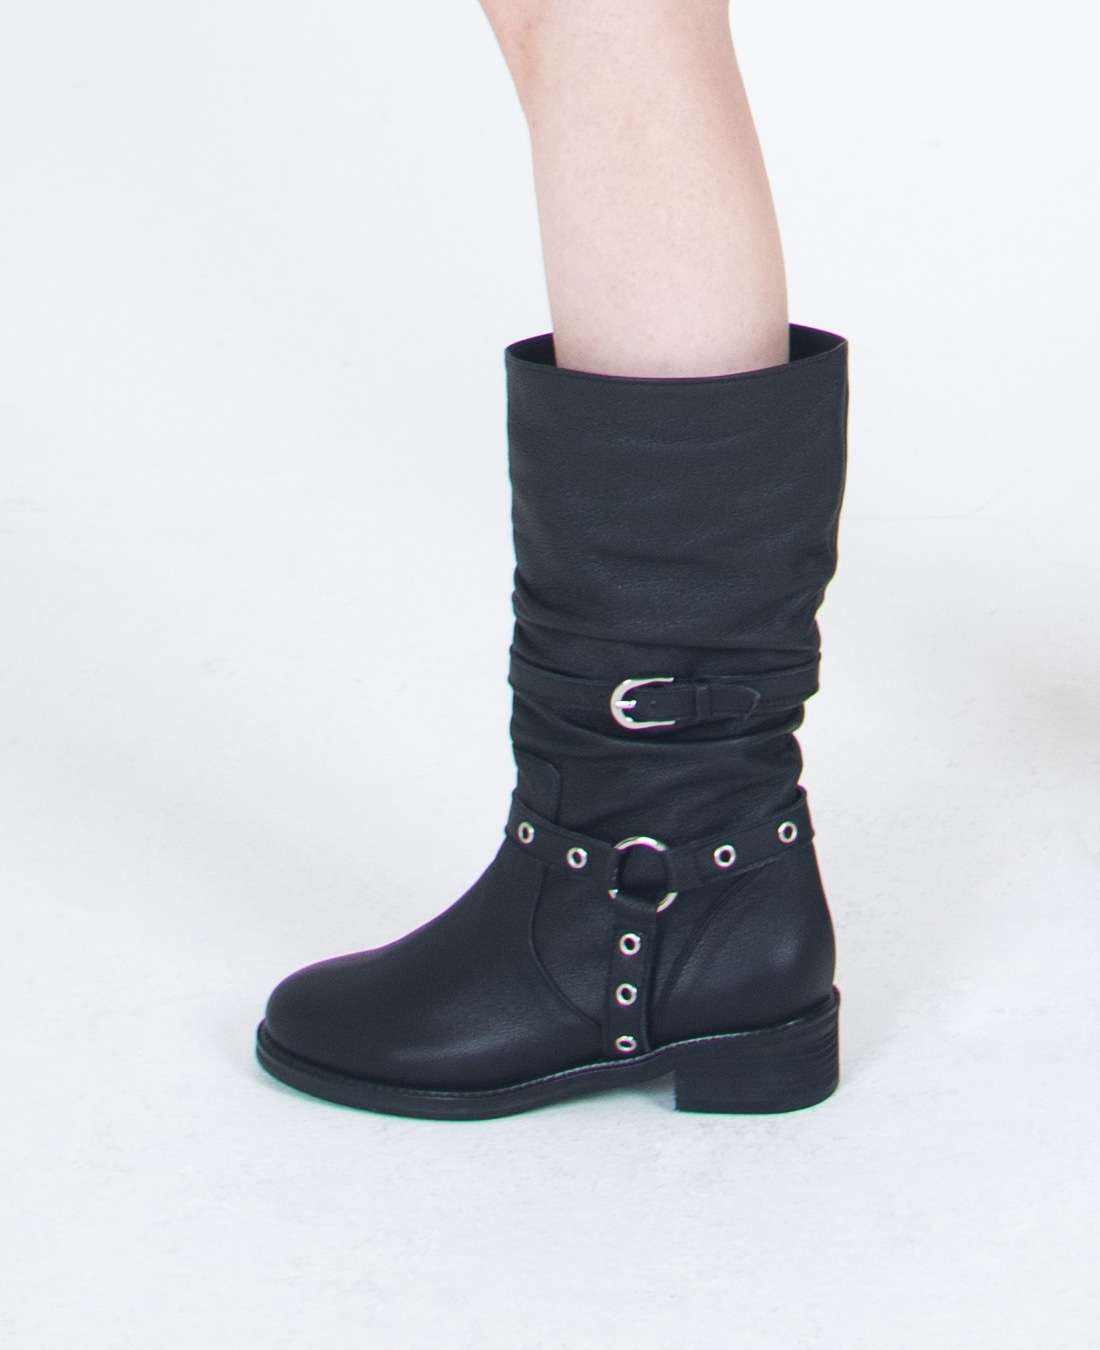 Slouchy Rider Boots (Black)